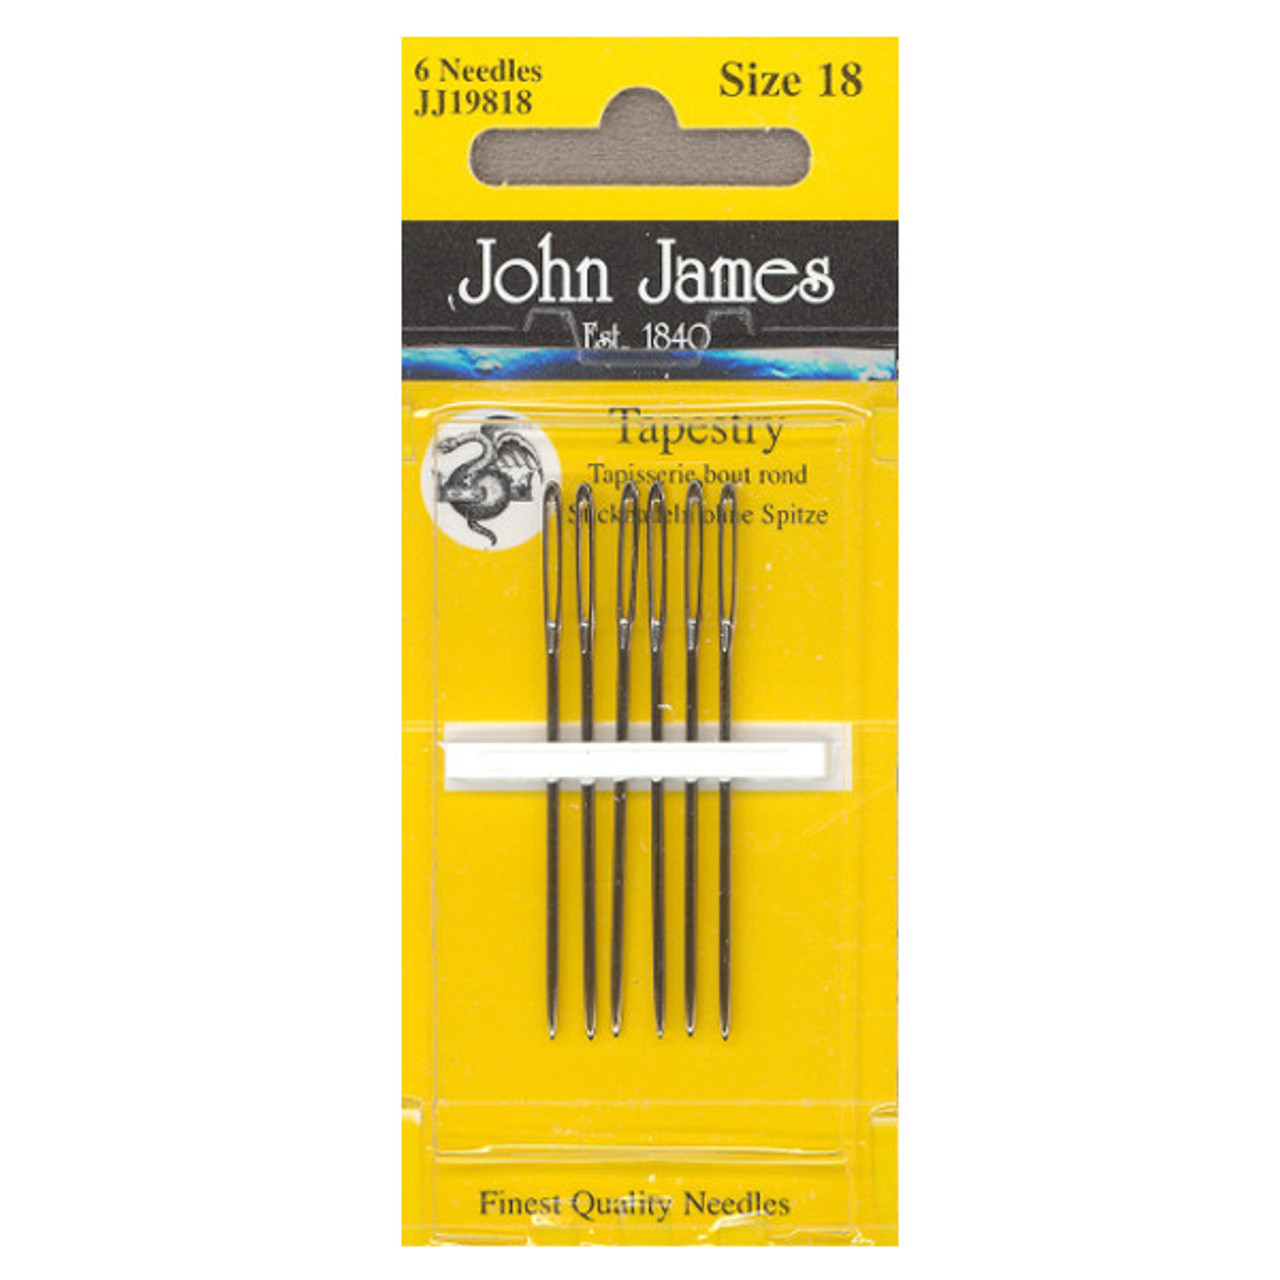 John James Tapestry Needles Size 18 - The Websters